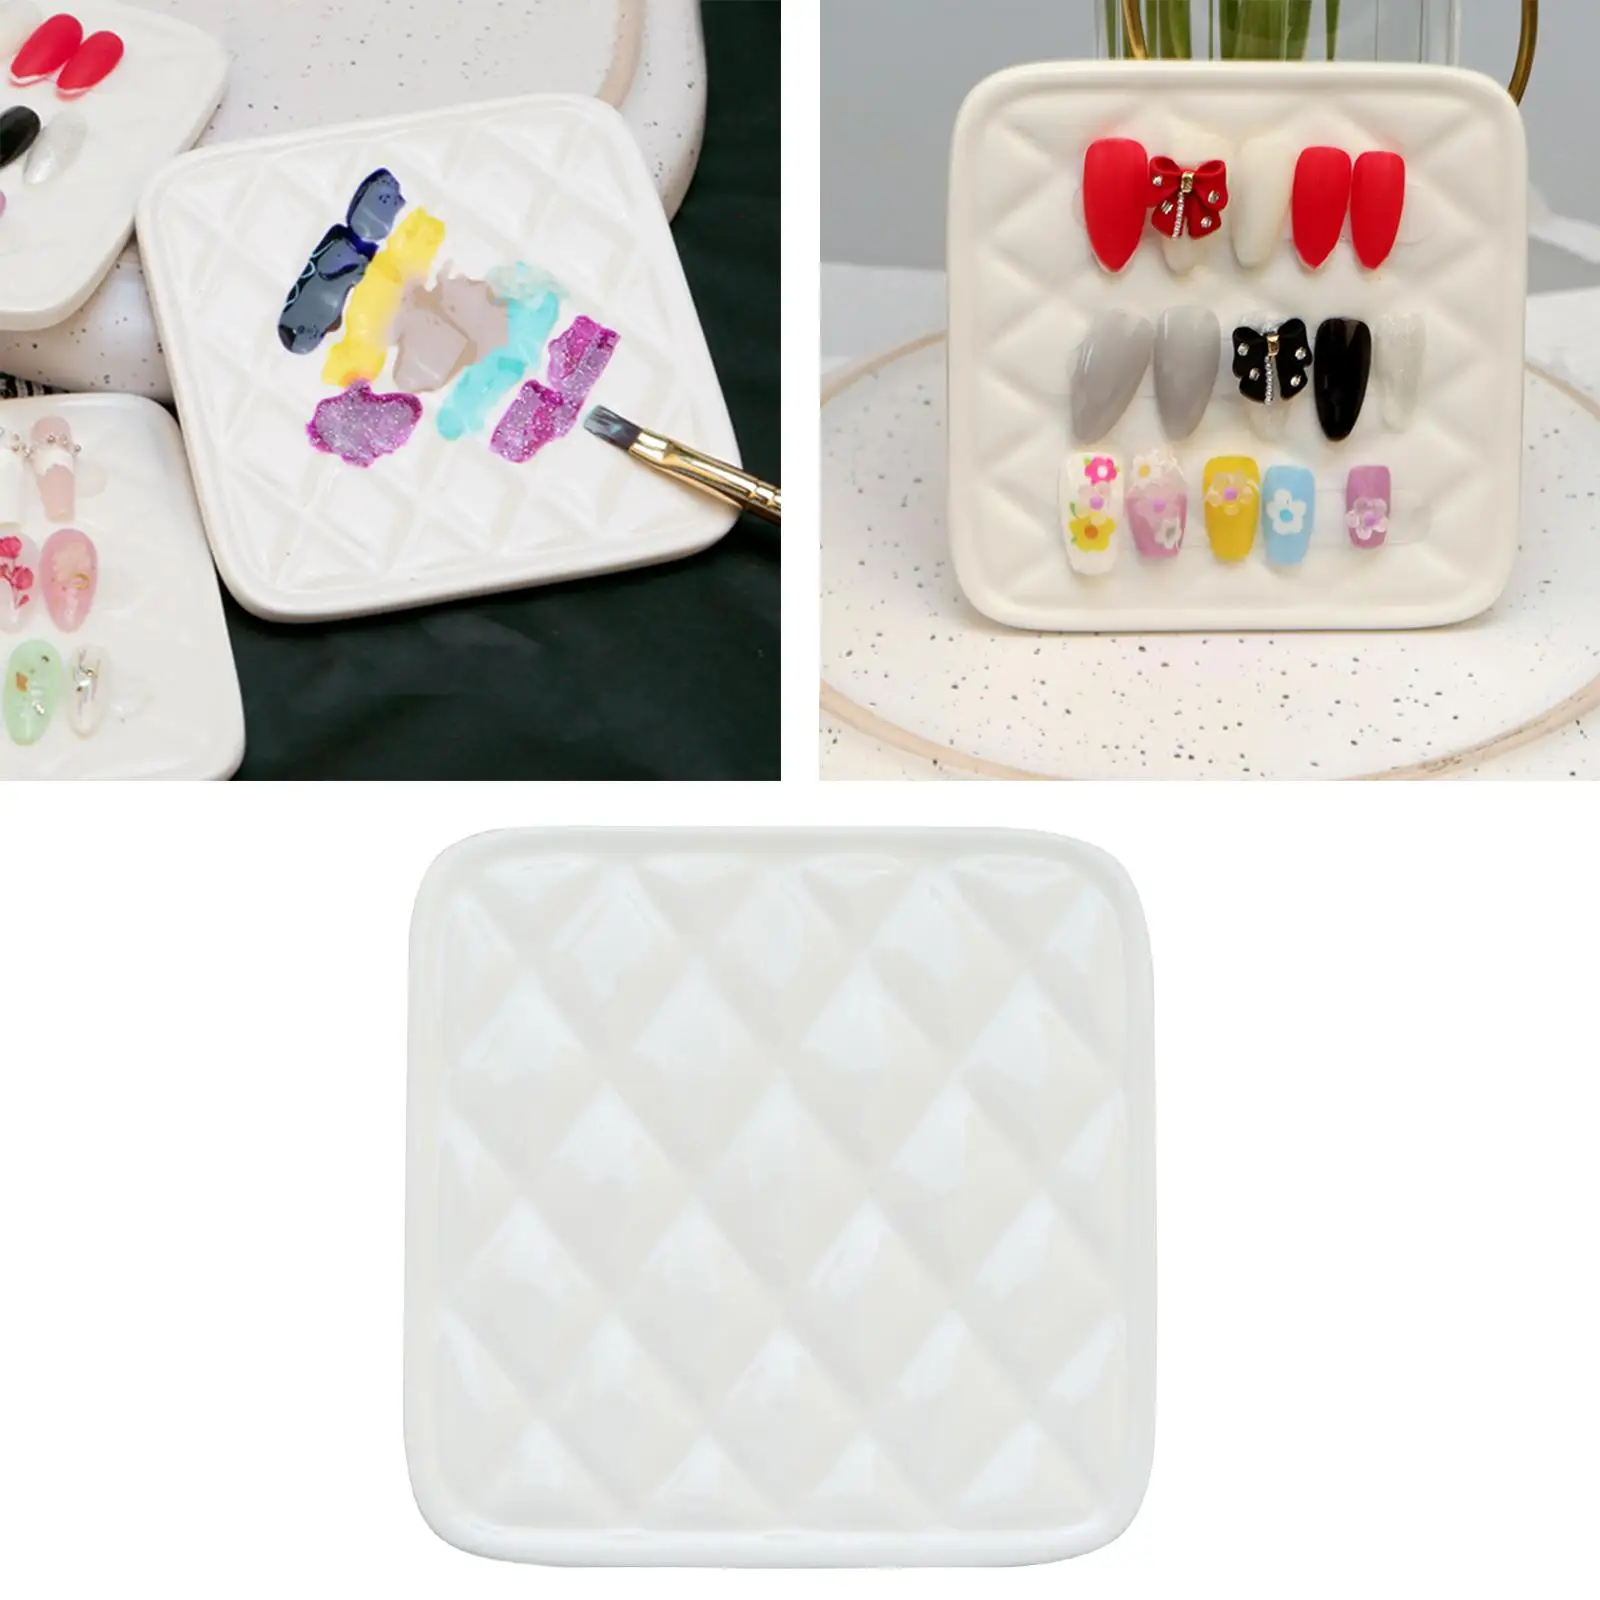 Ceramic Nail Art Palette Nail Art Display Board Color Mixing Tray for Home